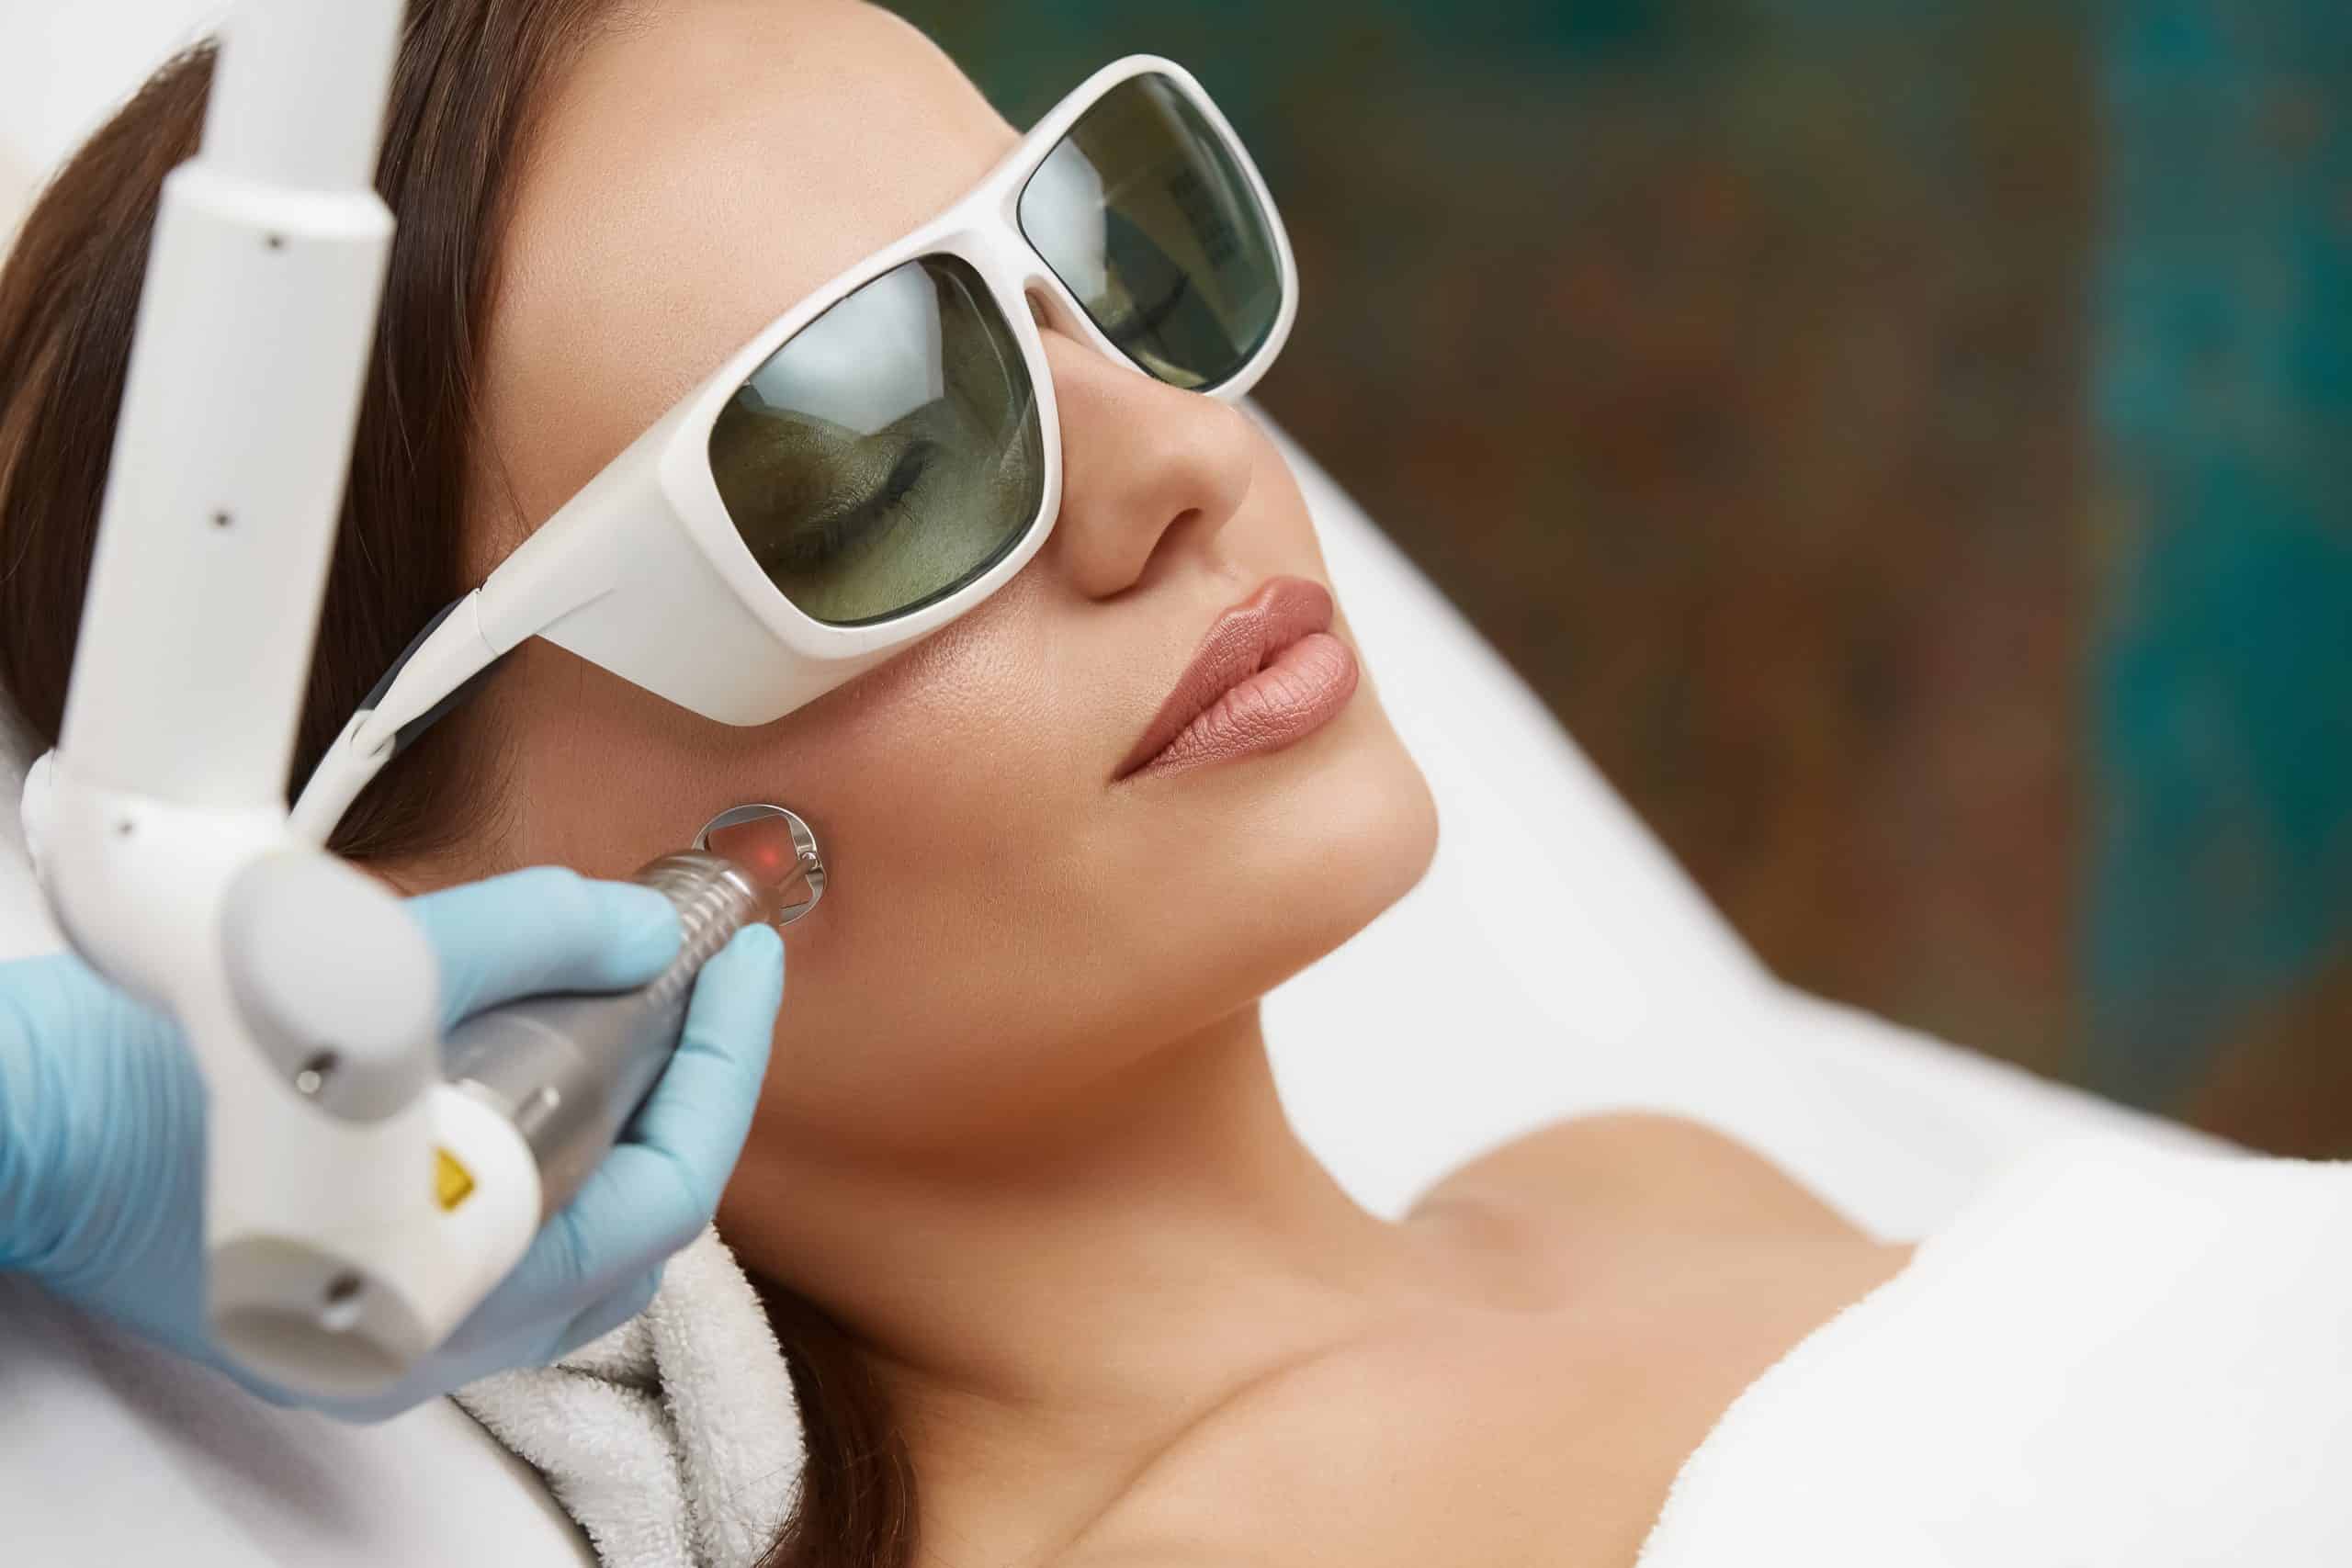 Laser Facial Opus Mini Treatment Your Pathway to Flawless Complexion